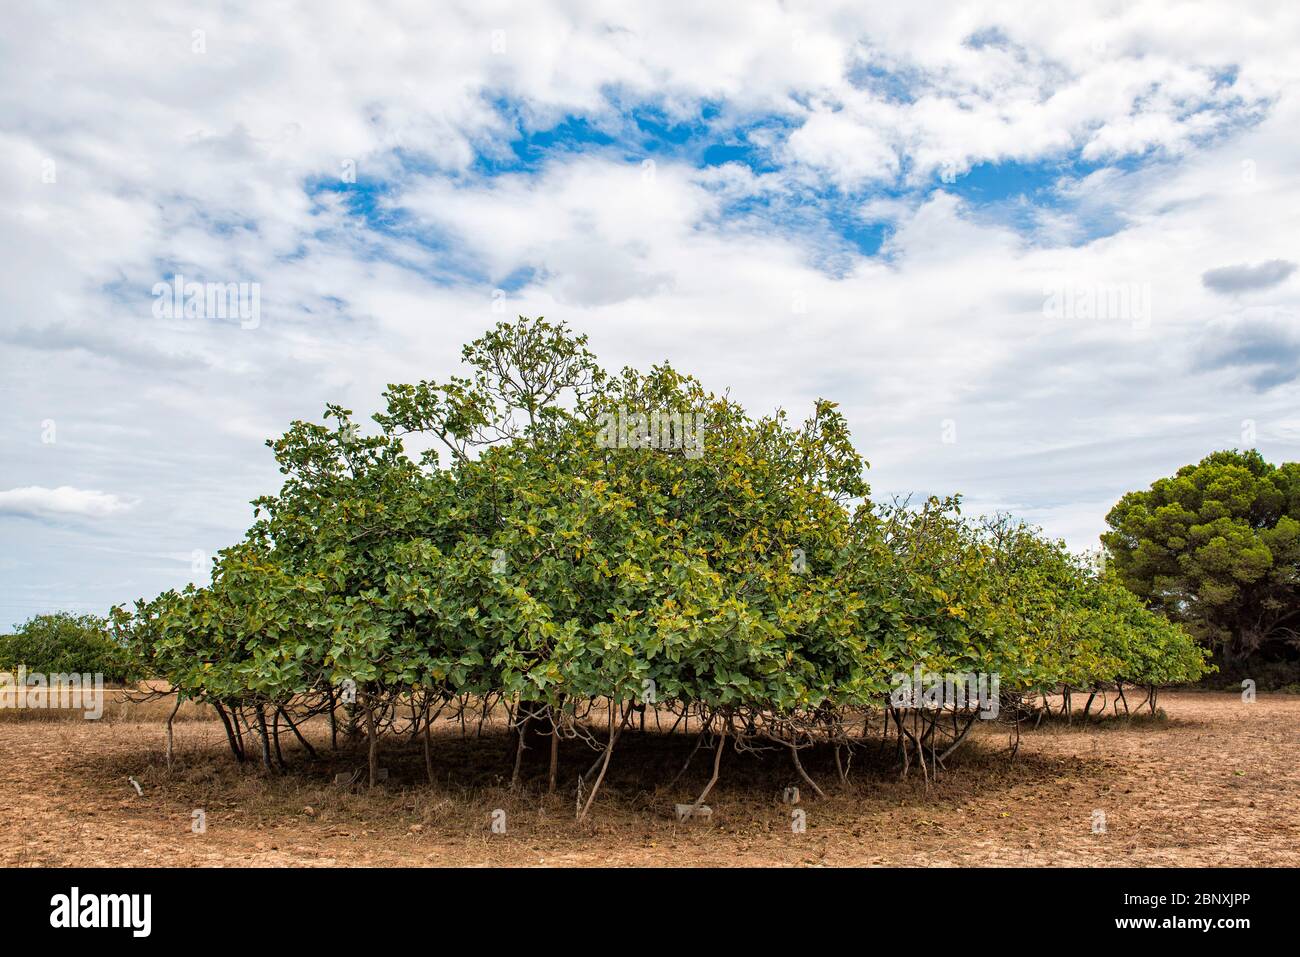 Formentera, Balearic Islands, Spain. A characteristic low and very wide fig tree in the countryside. This tree is typical of the Balearic Islands. Stock Photo